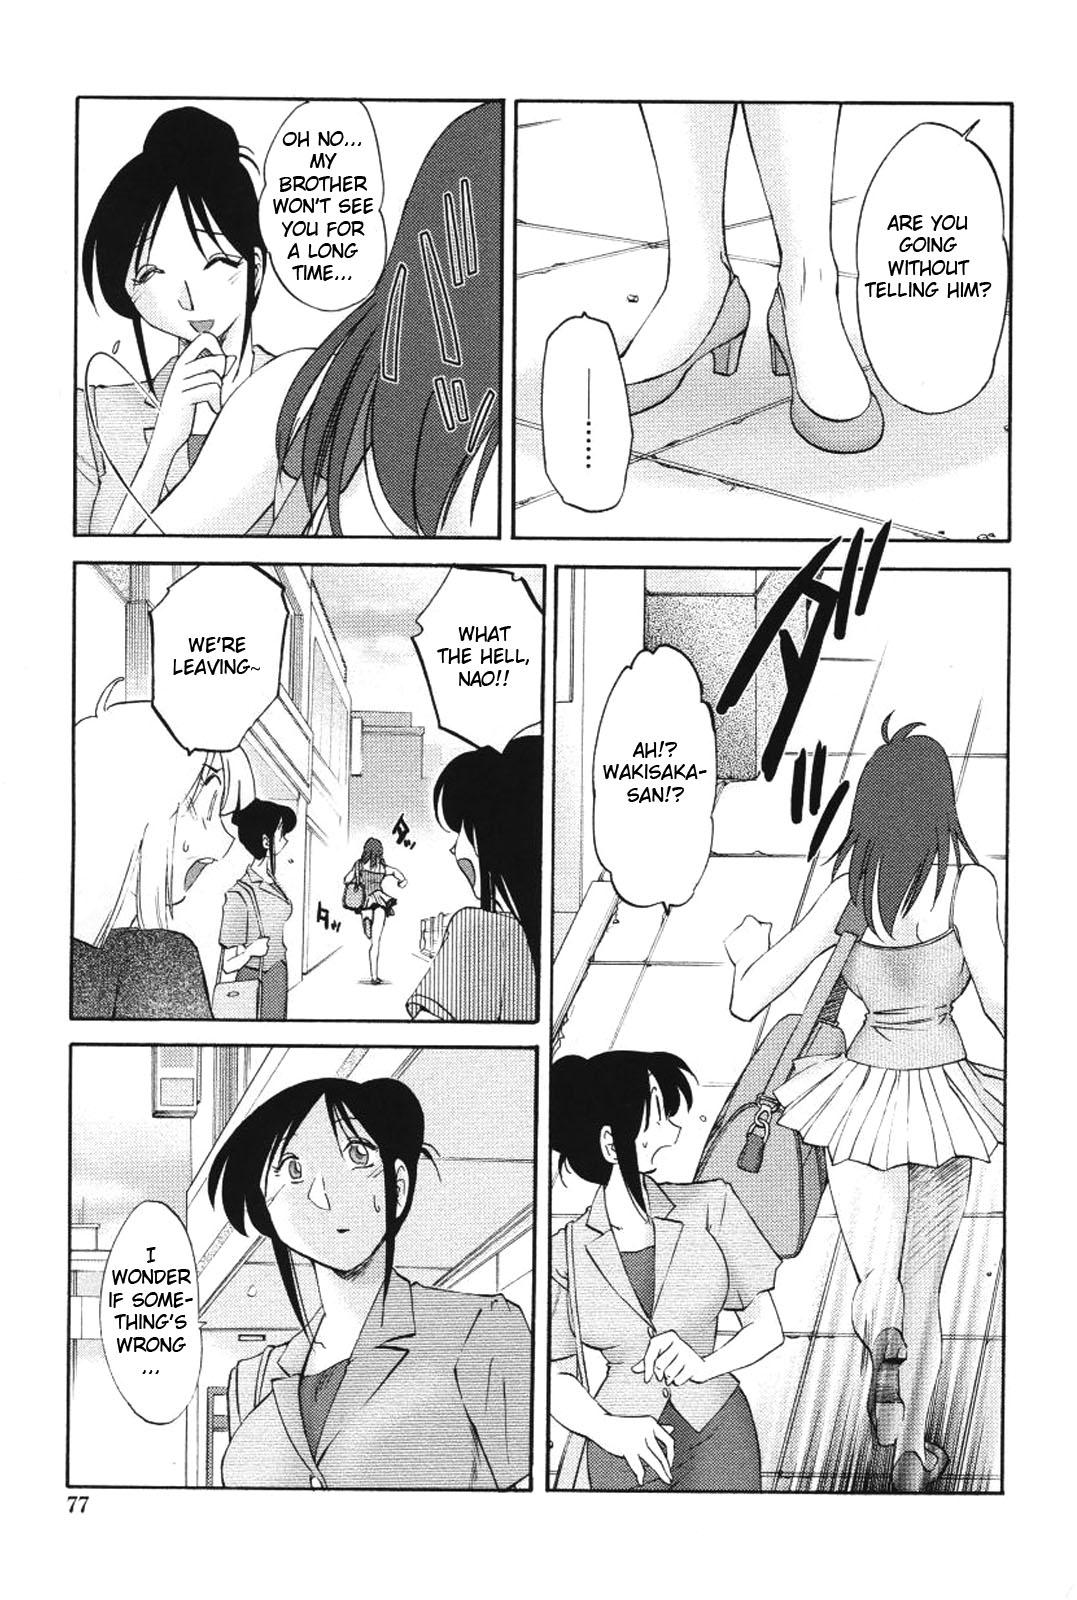 Sex Toys My Sister is My Wife Chapter 12 (English) Translated by Fated Cricle Chat - Page 7